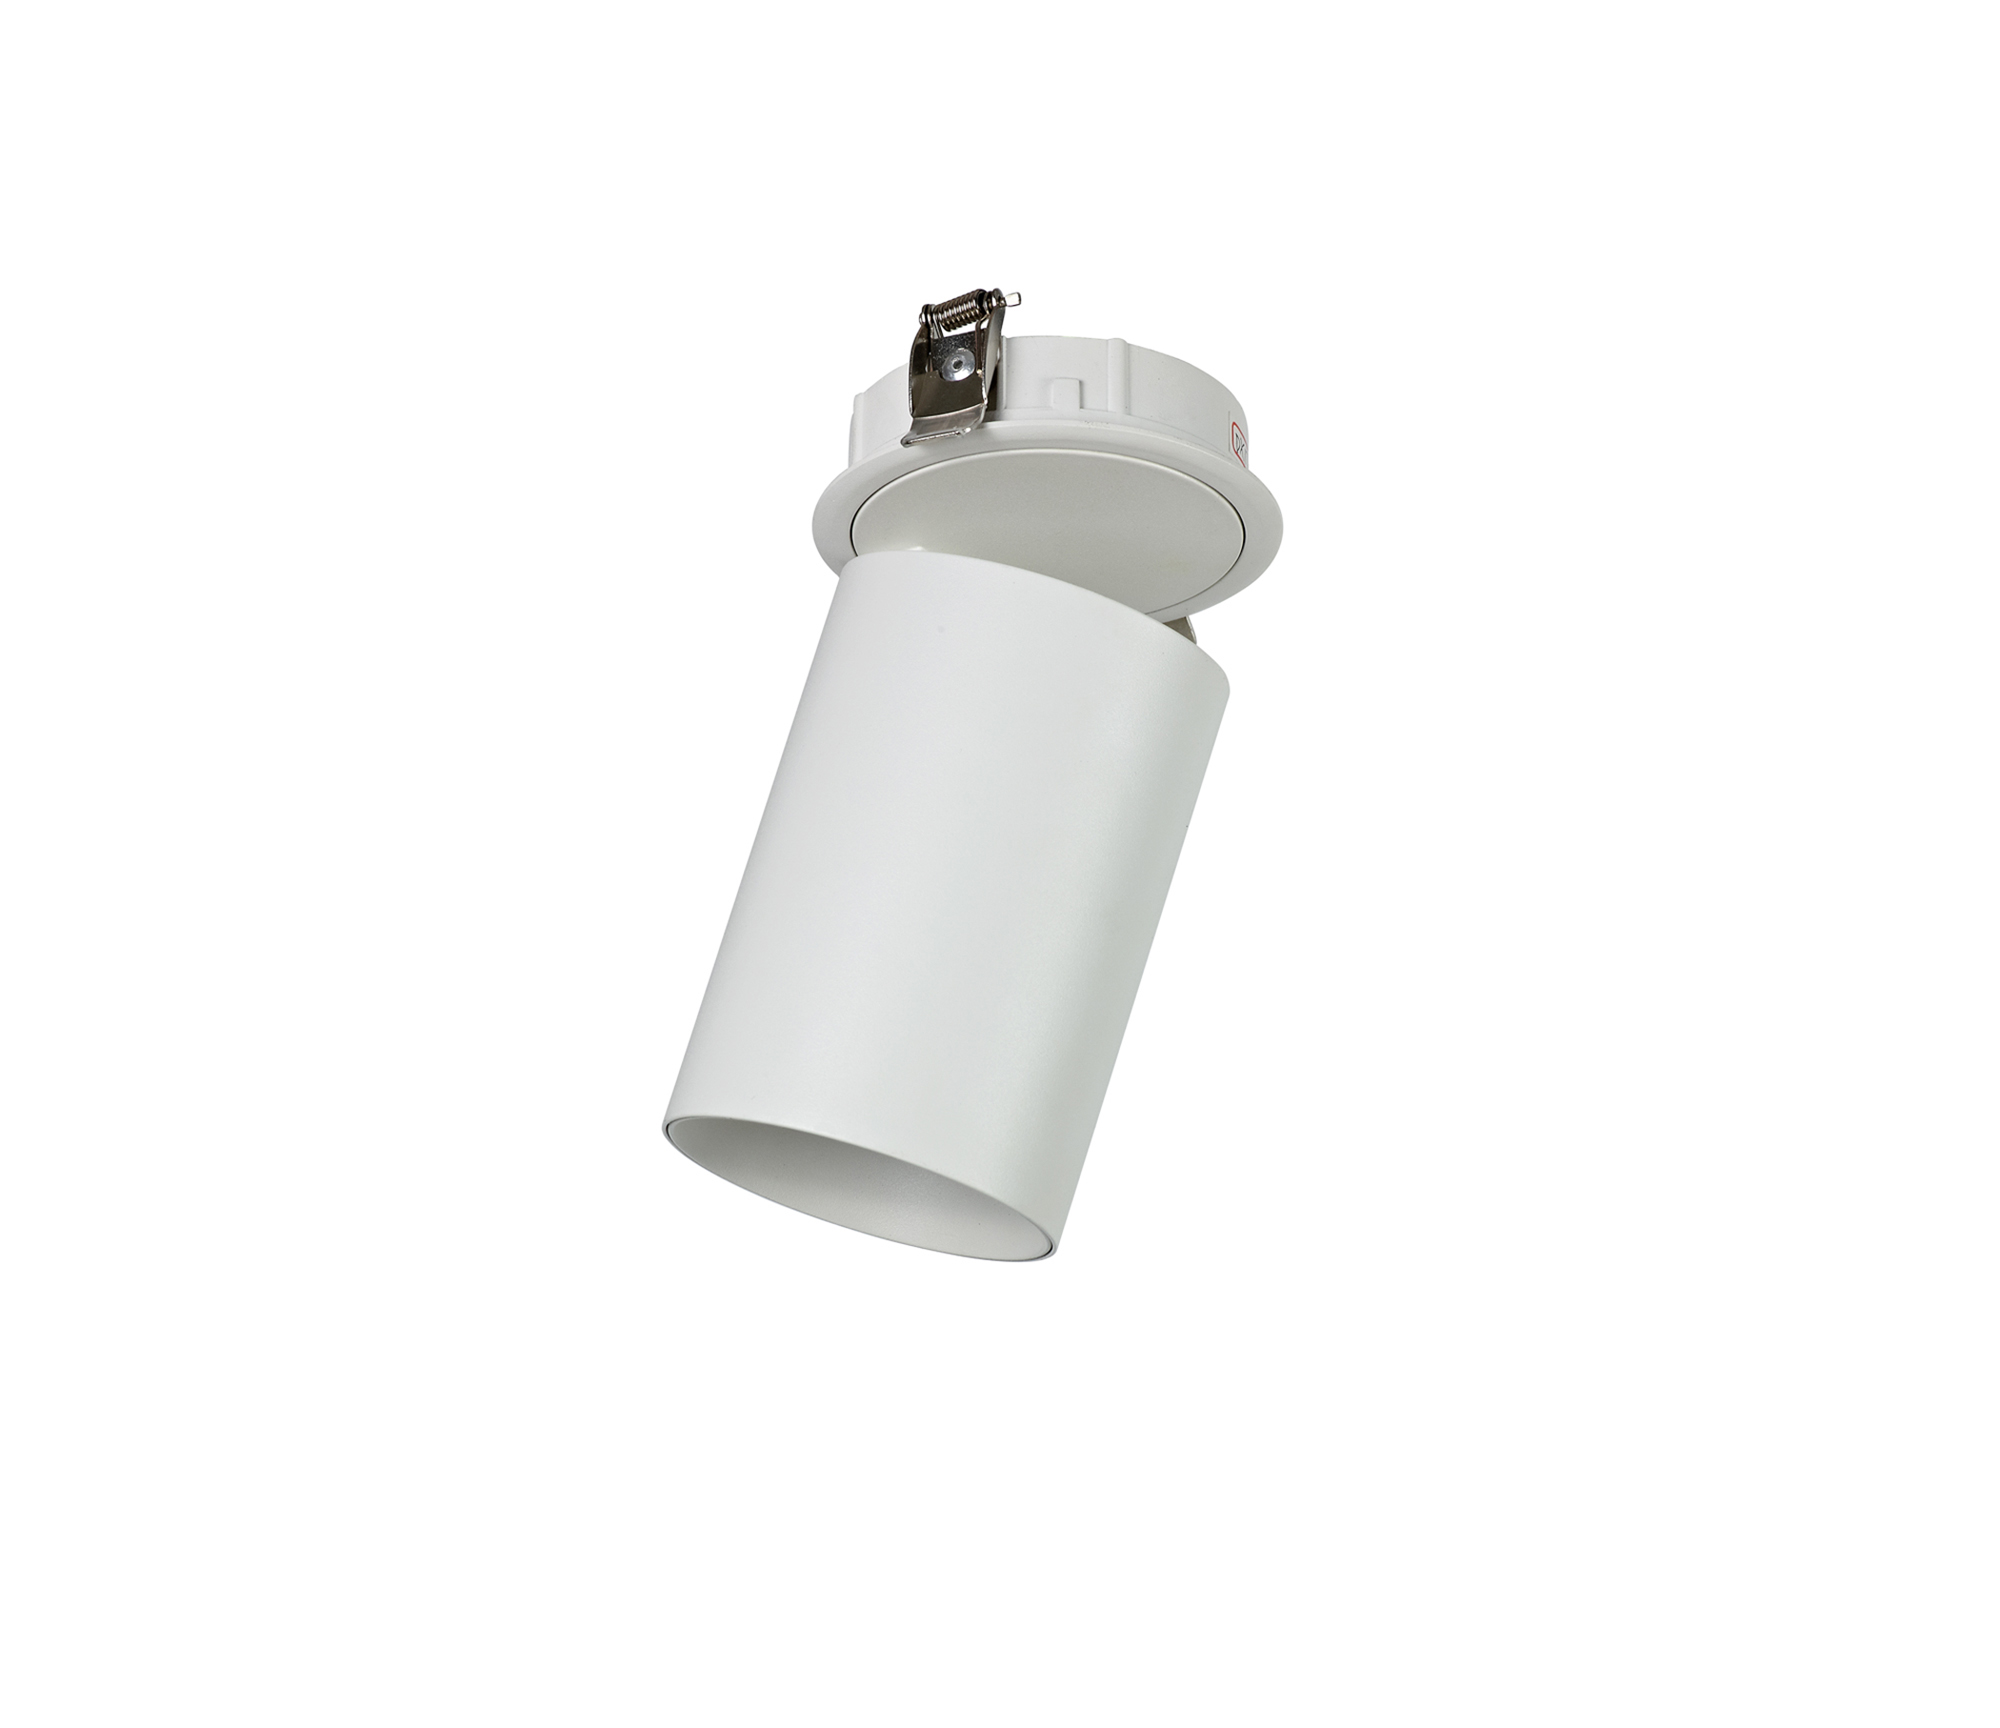 DX170005  Eos A 20, White & White, Recessed Base LED Spotlight, C/W 20W 450mA Driver, WITHOUT LED Engine, IP20, 5yrs Warranty